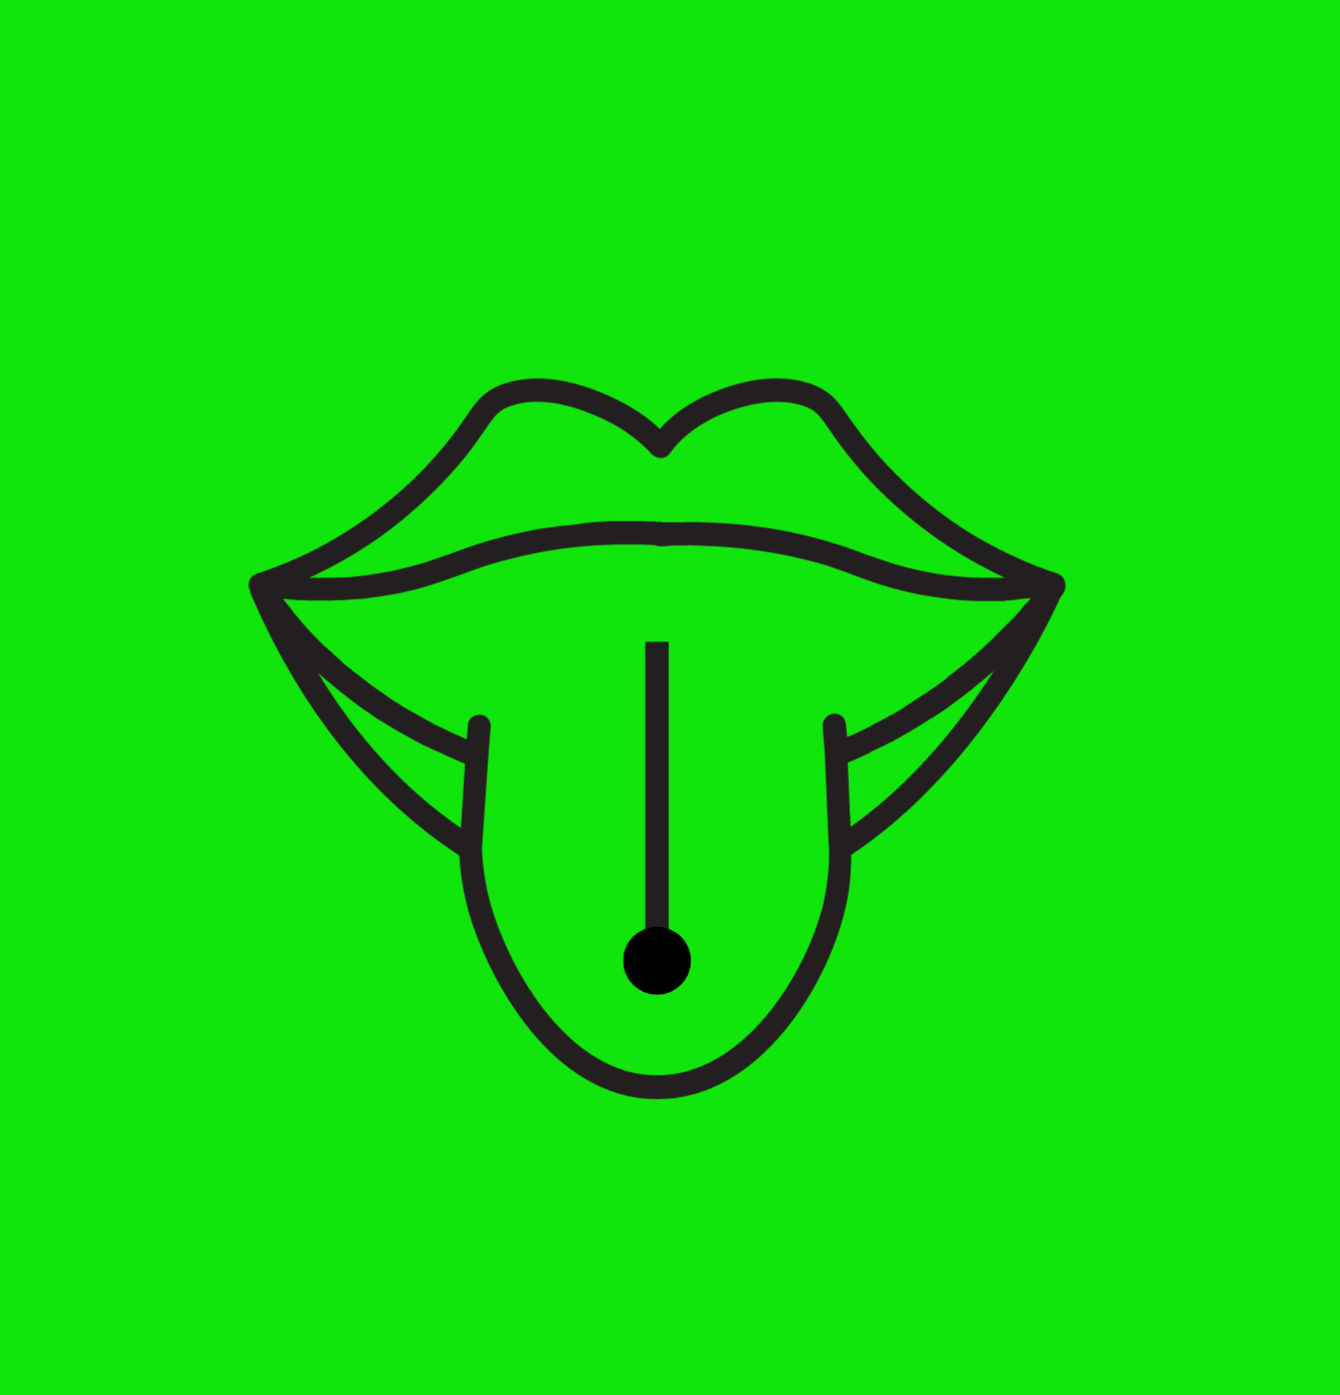 tongue picture with a tongue piercing on a green background